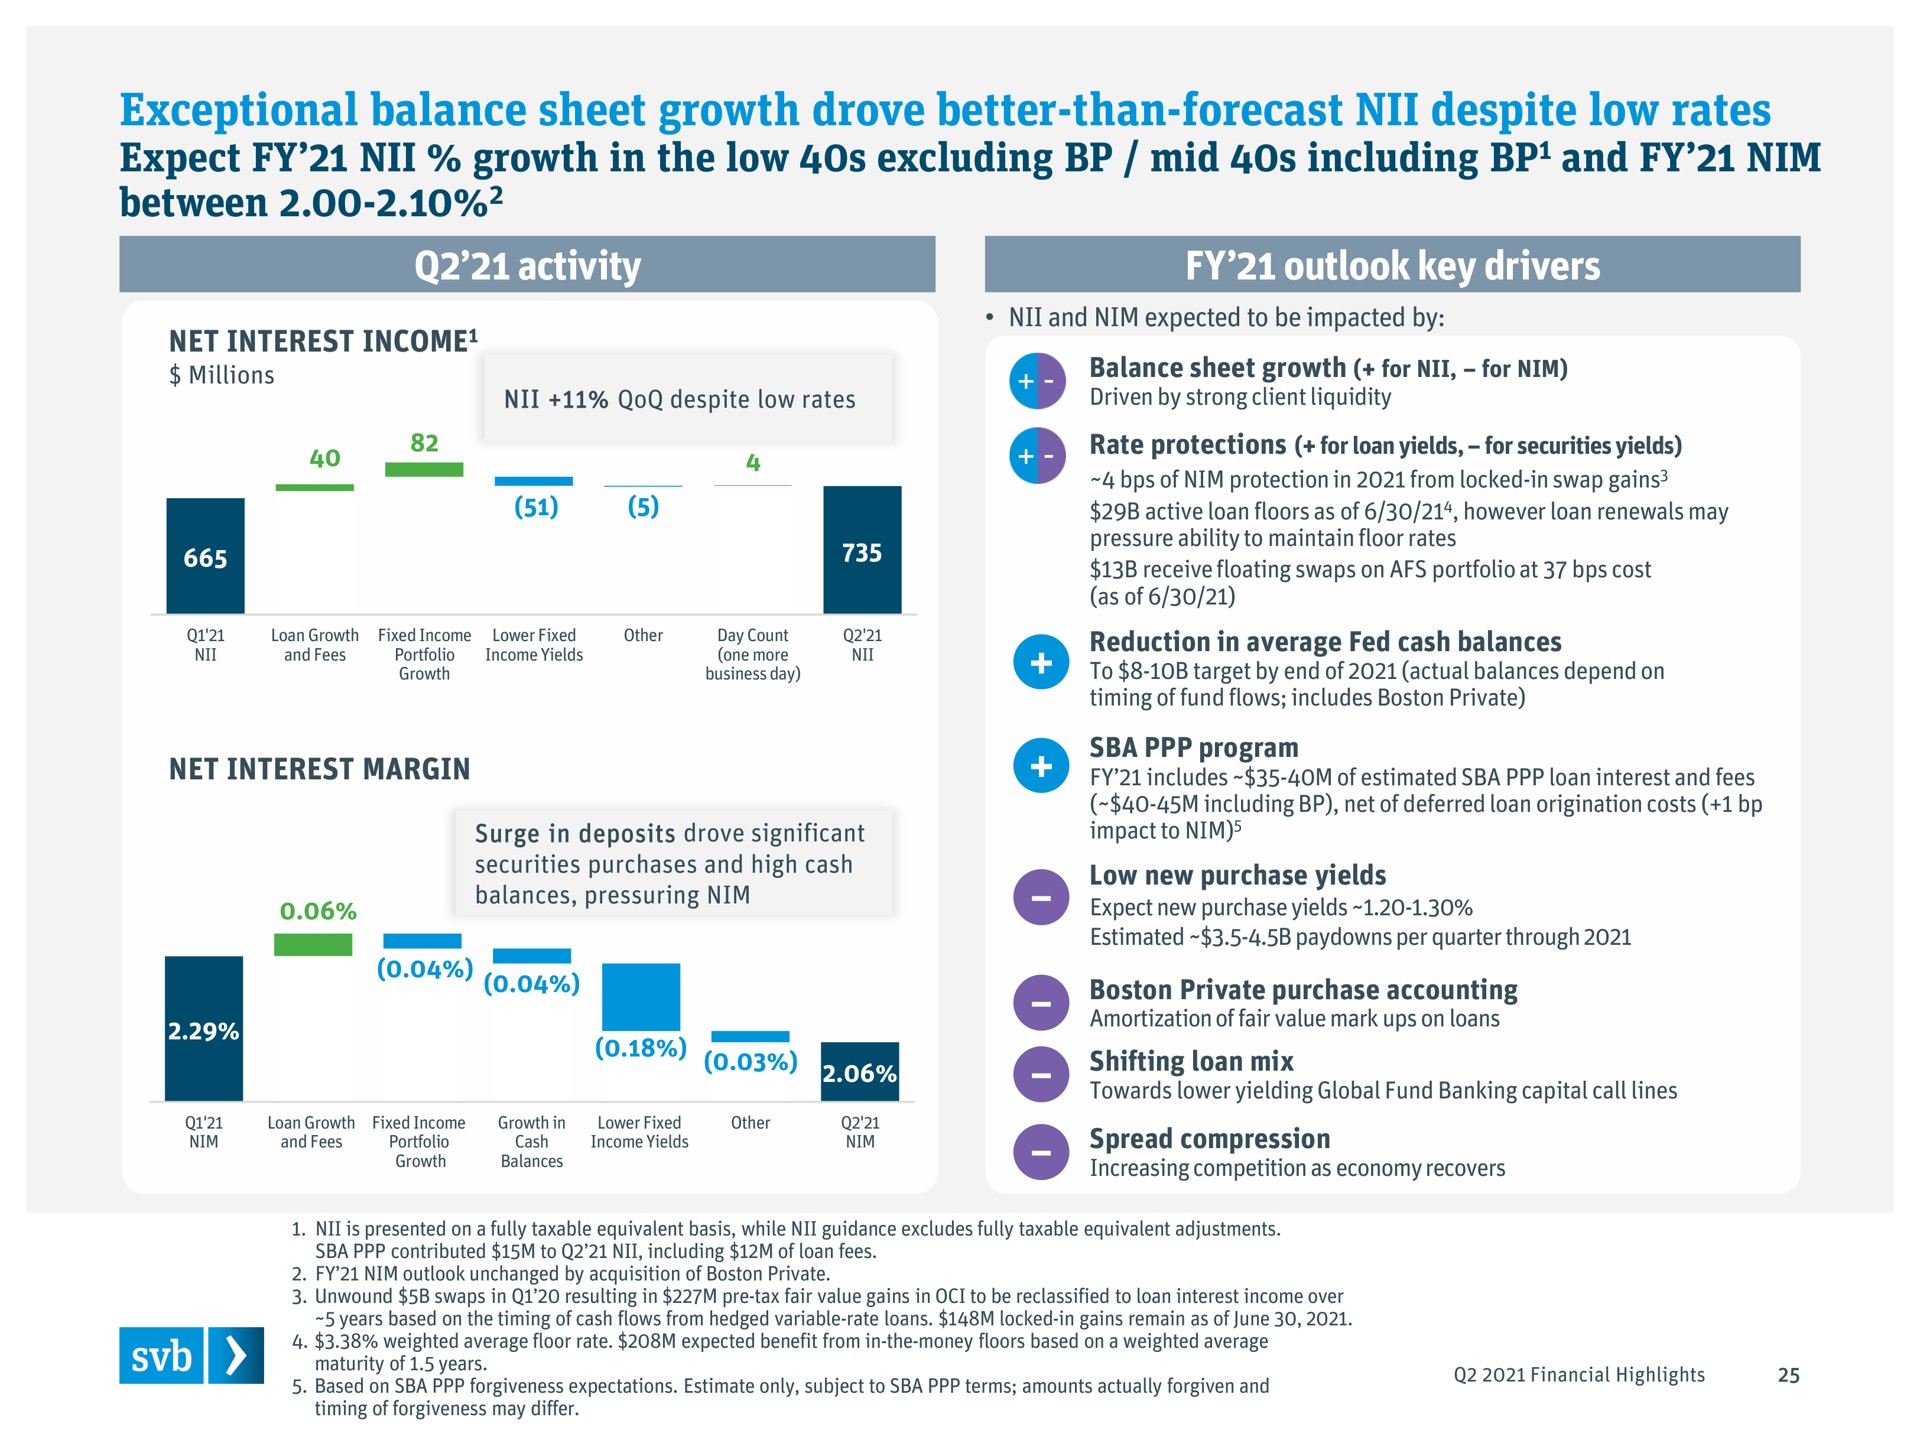 exceptional balance sheet growth drove better than forecast despite low rates tau | Silicon Valley Bank